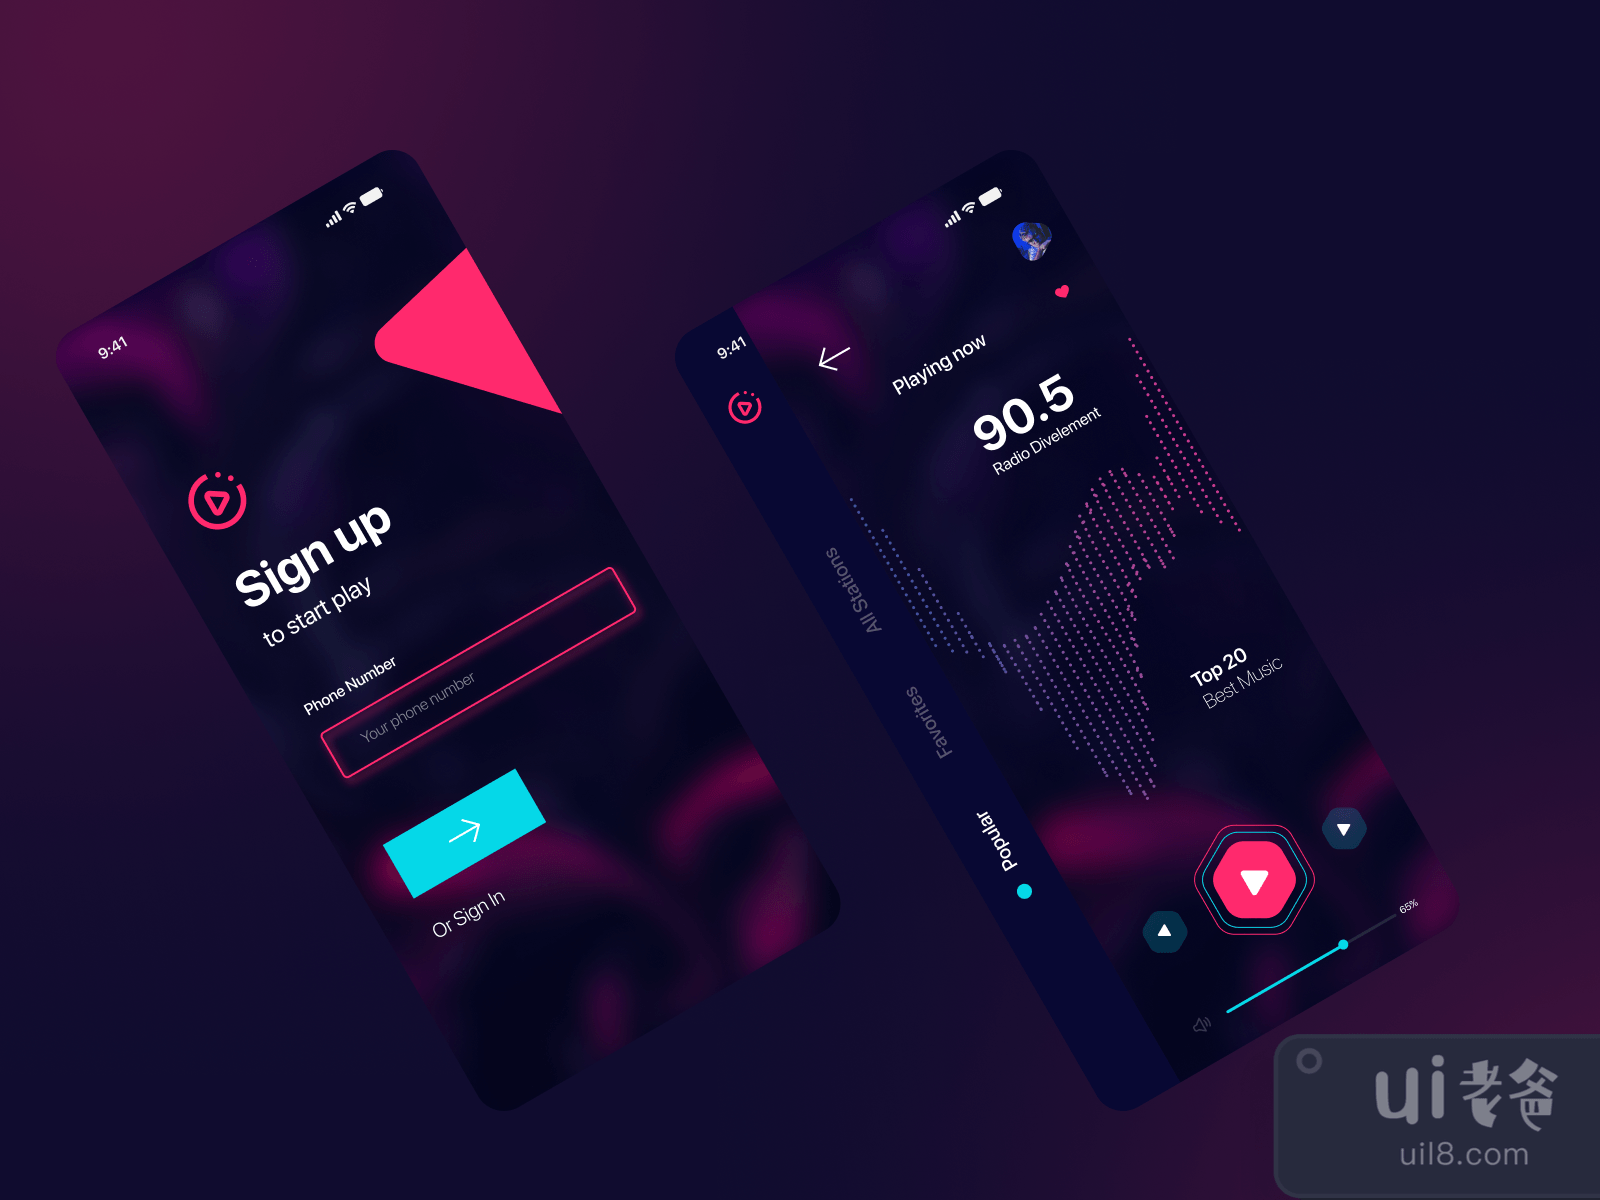 Radio App Concept for Figma and Adobe XD No 3